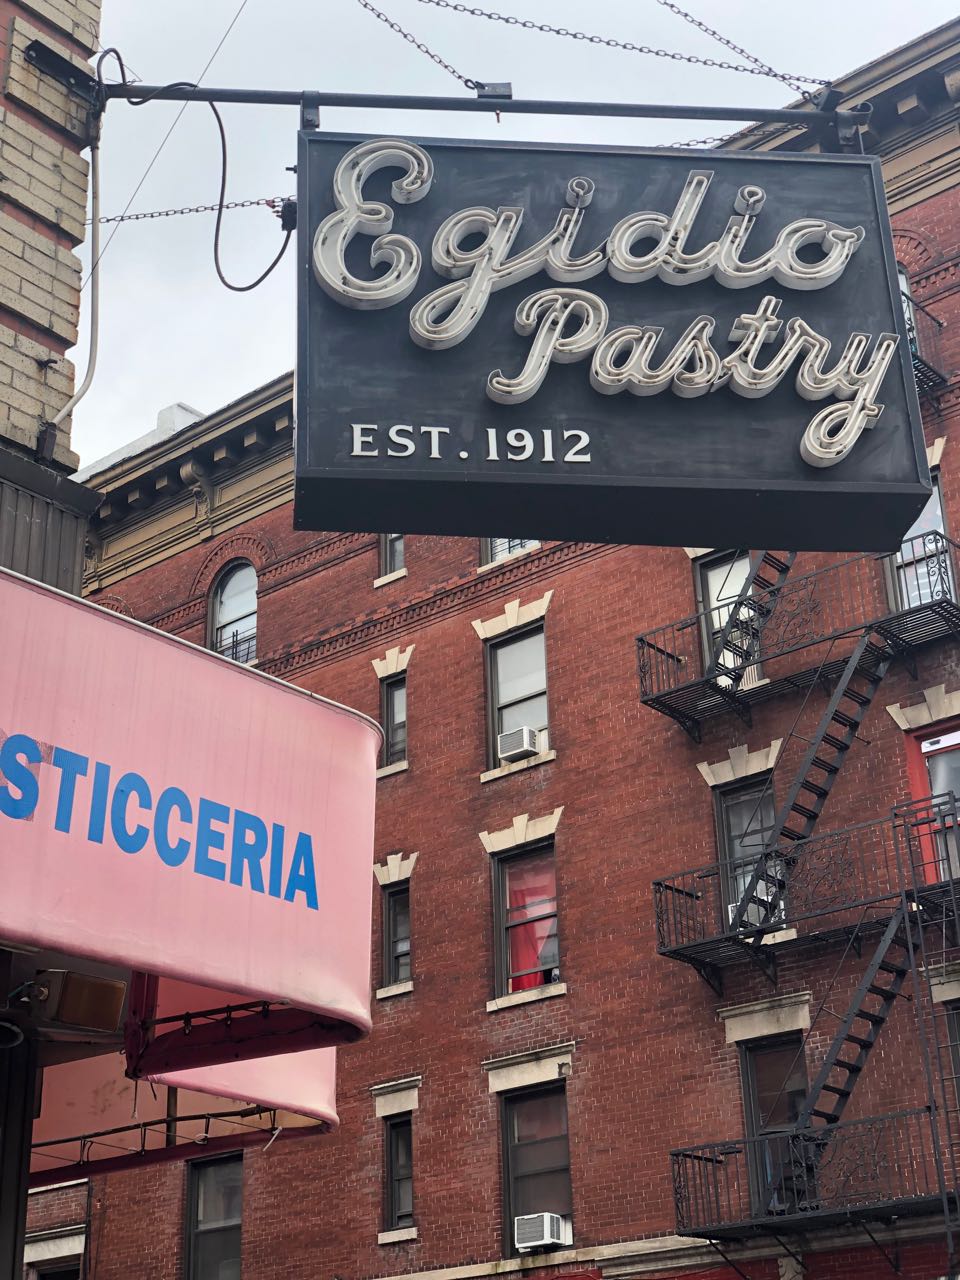 Our Guide On How To Experience The Best Italian Food In NYC